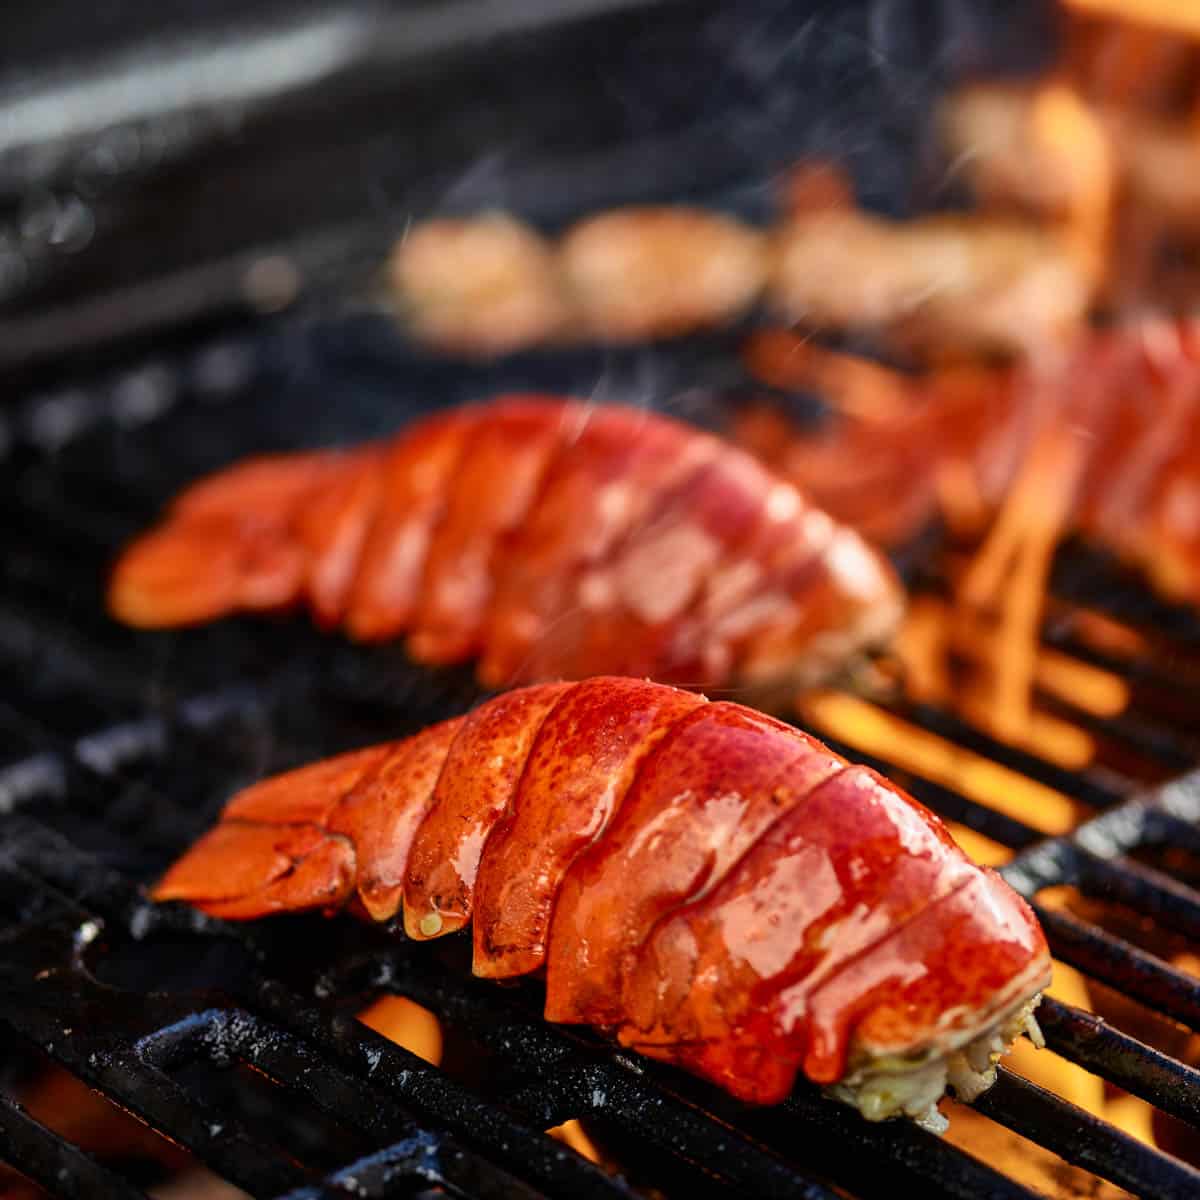 Lobster tails on the grill with flames.